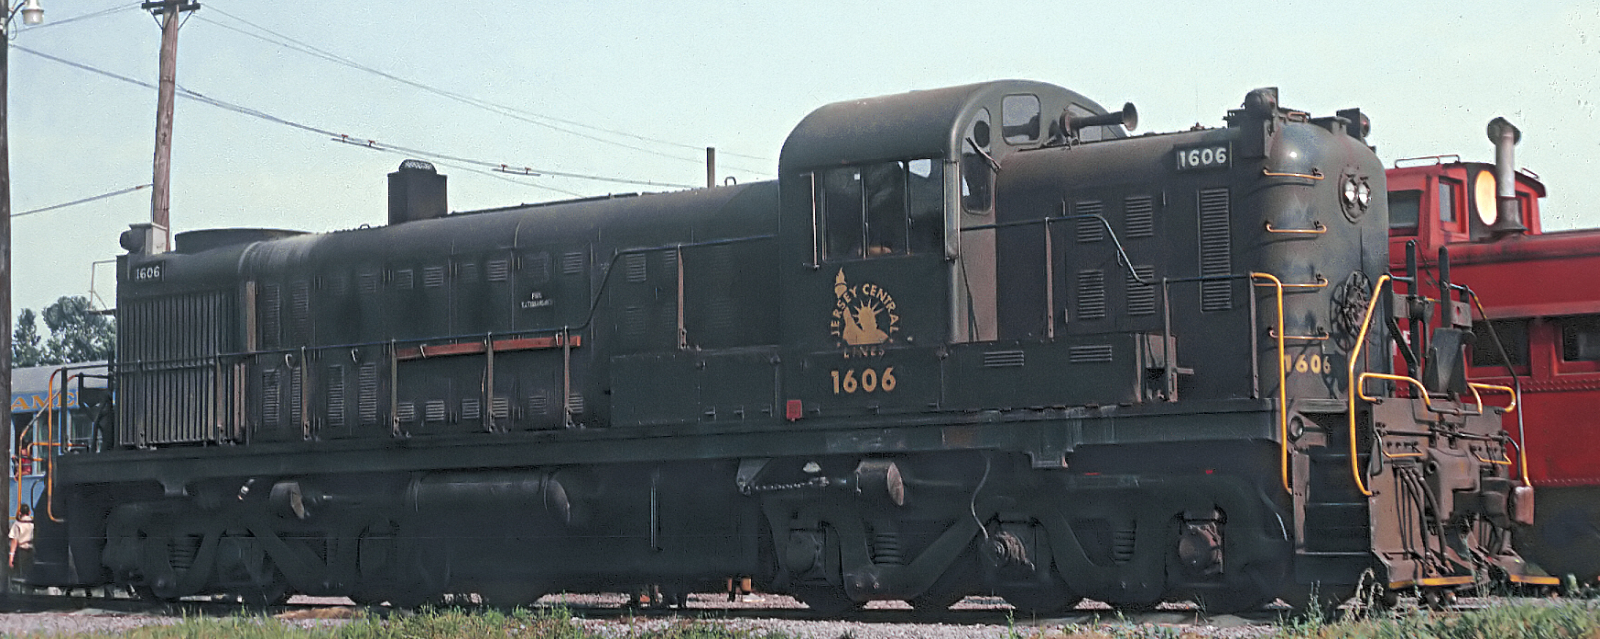 Jersey Central No. 1606, an RSD-4, in July 1970 at Bethlehem, Pennsylvania